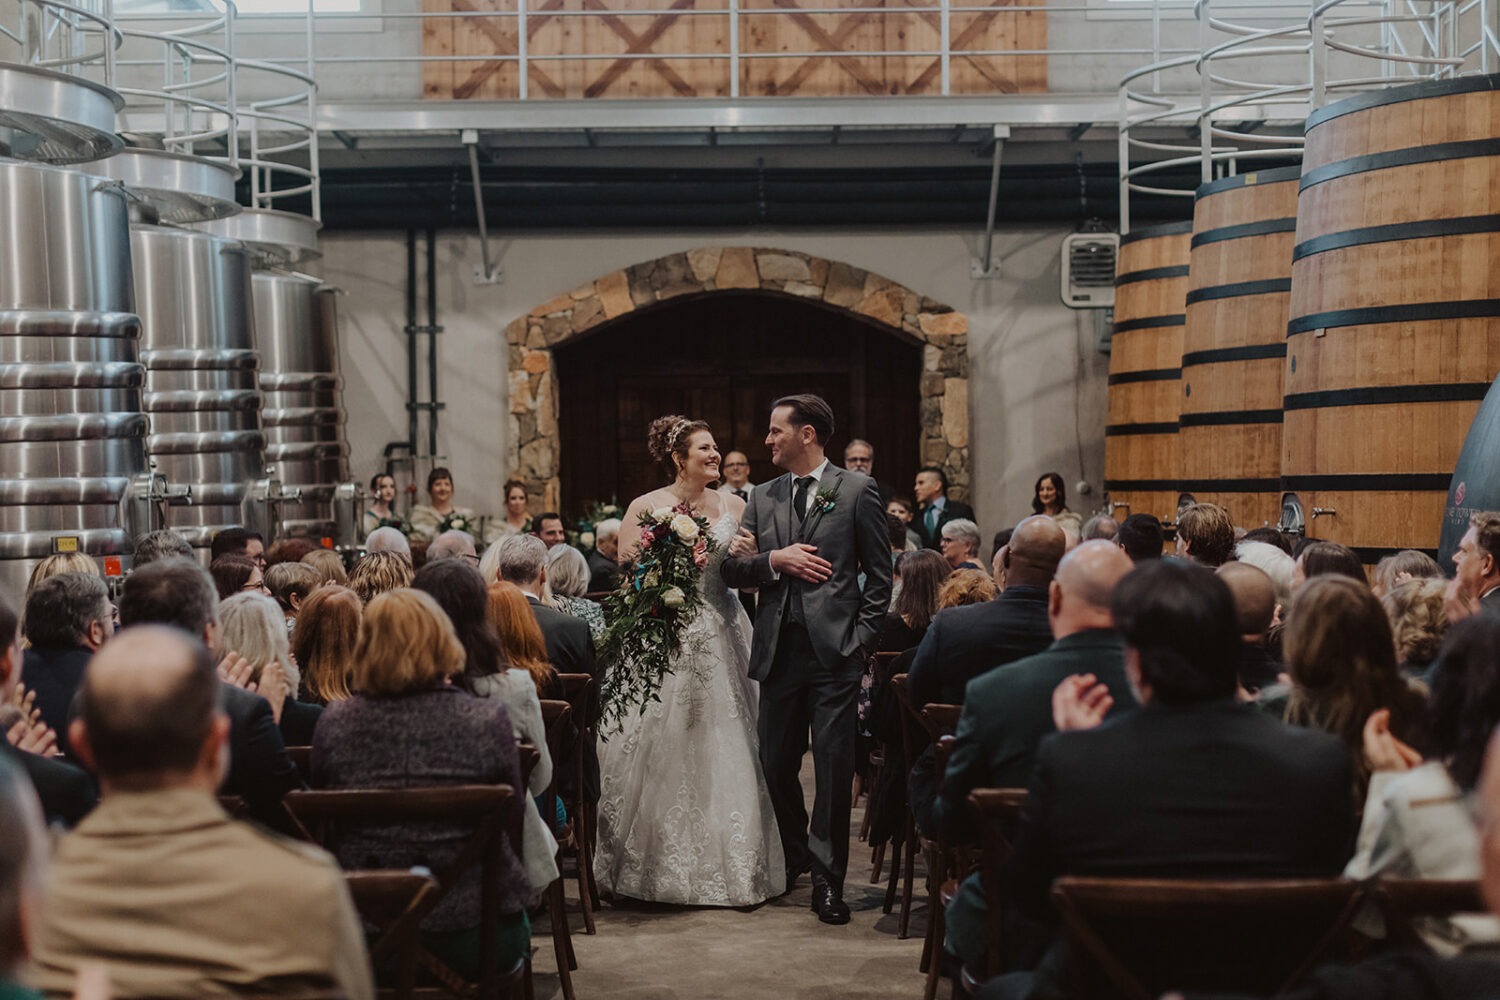 couple walks down aisle together at winery wedding 